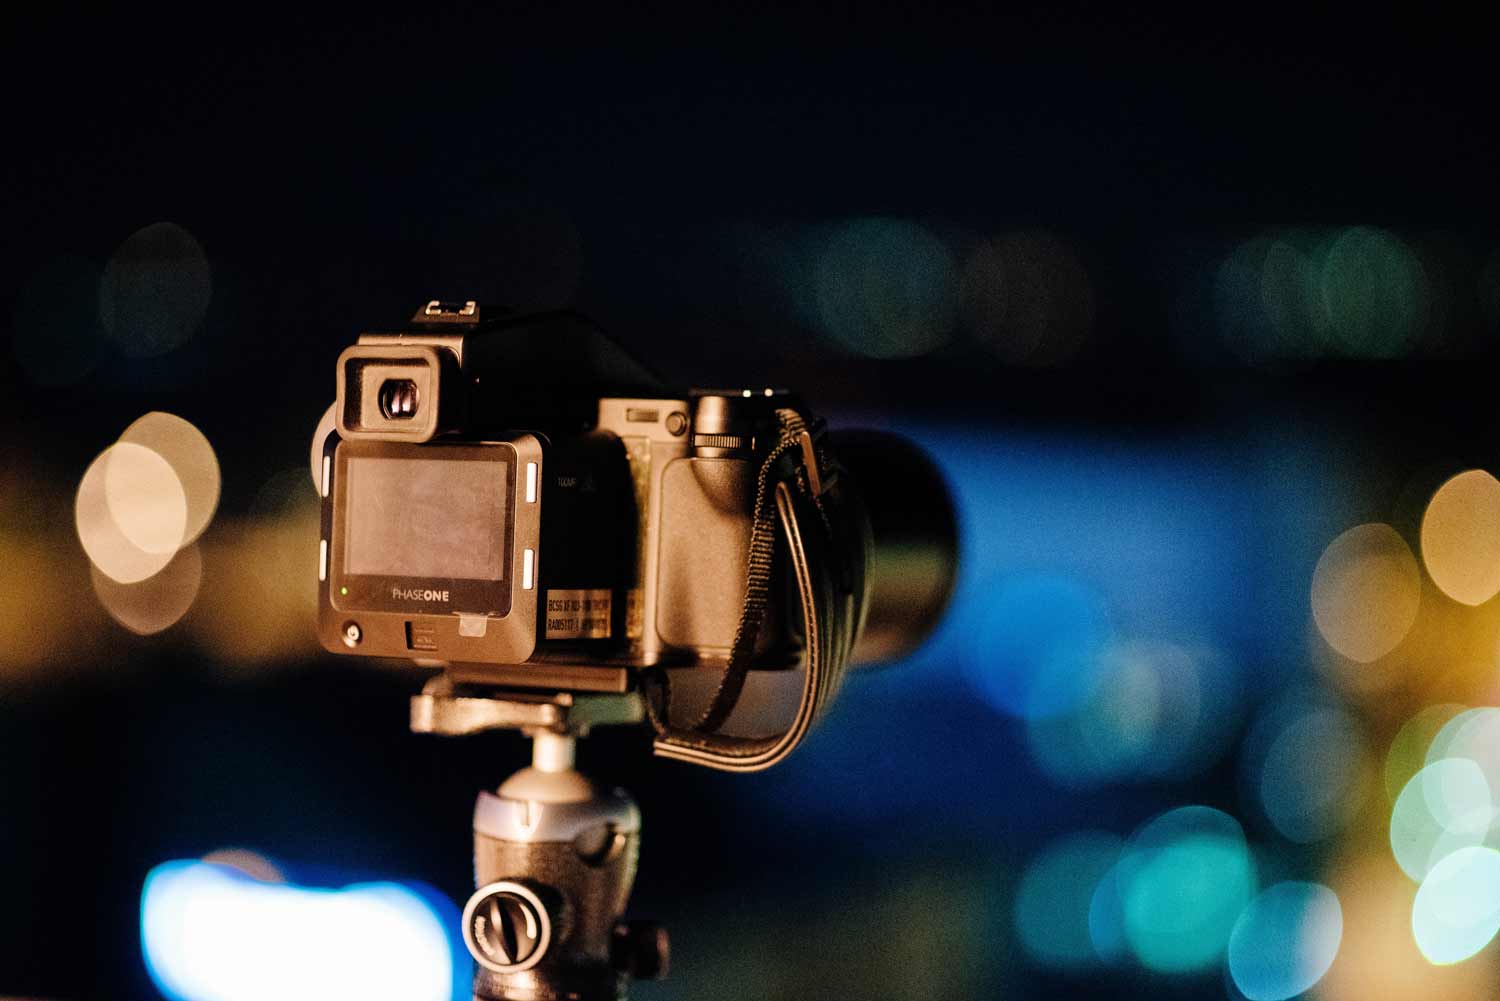 Image of a camera set up on a tripod for event photography